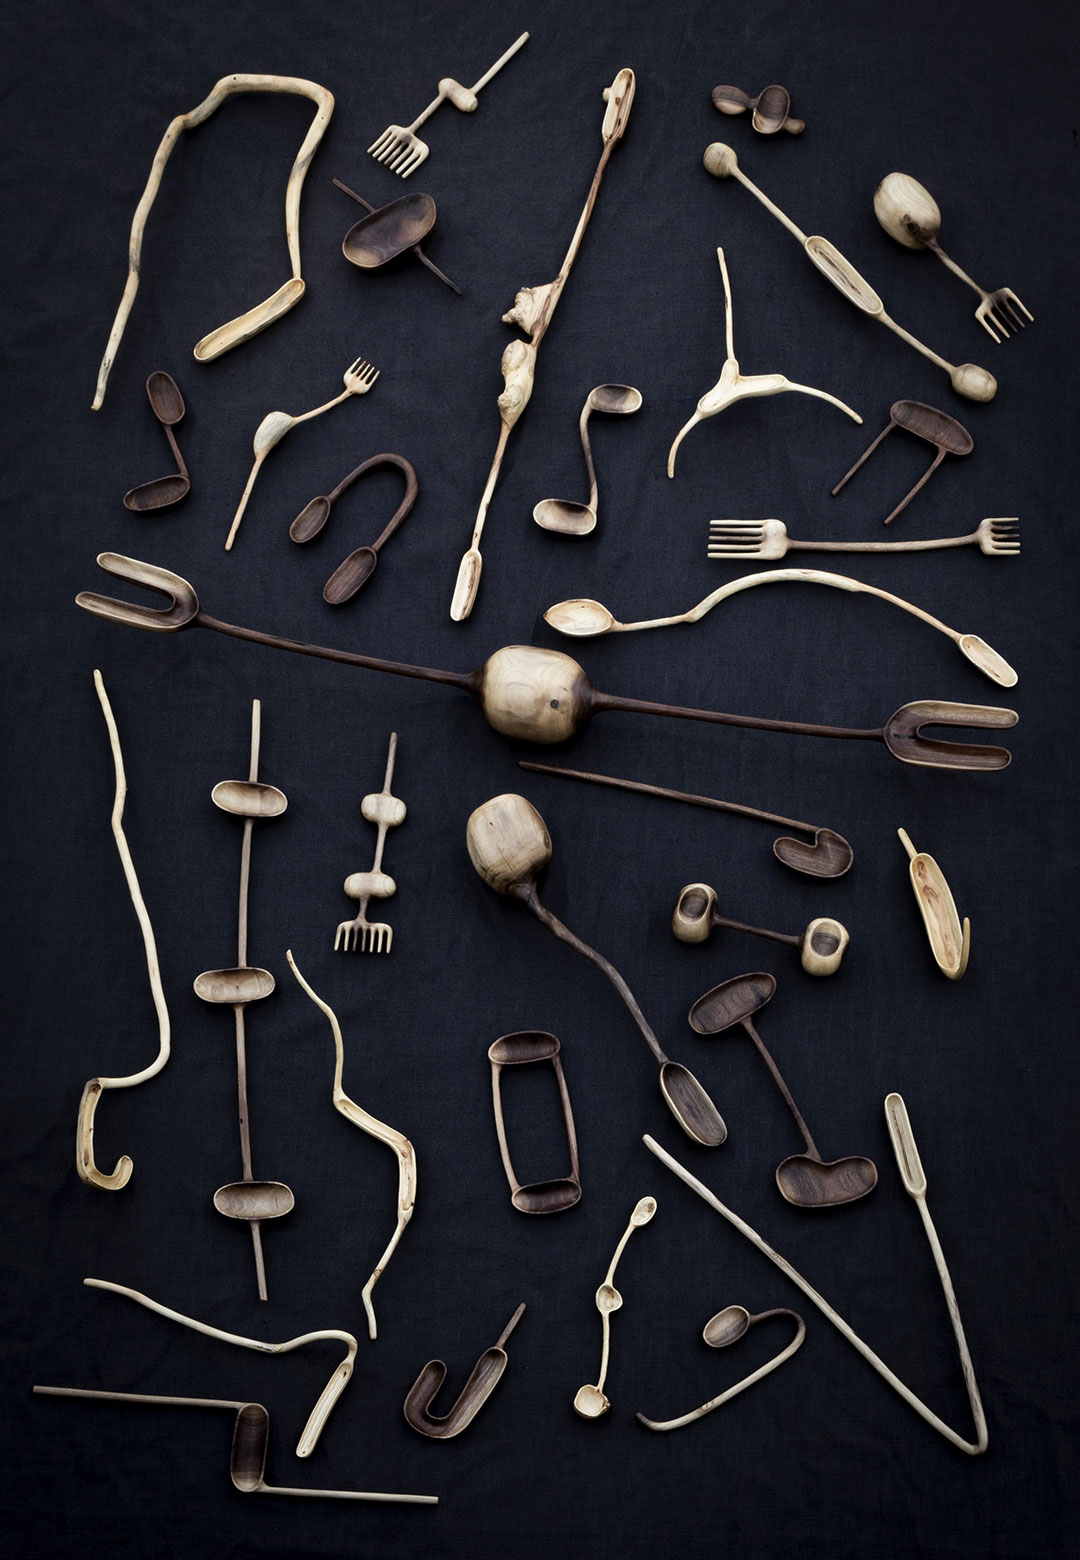 ‘Experimental Gastronomy’ by Steinbeisser is a brew of Korean food and biophilic cutlery